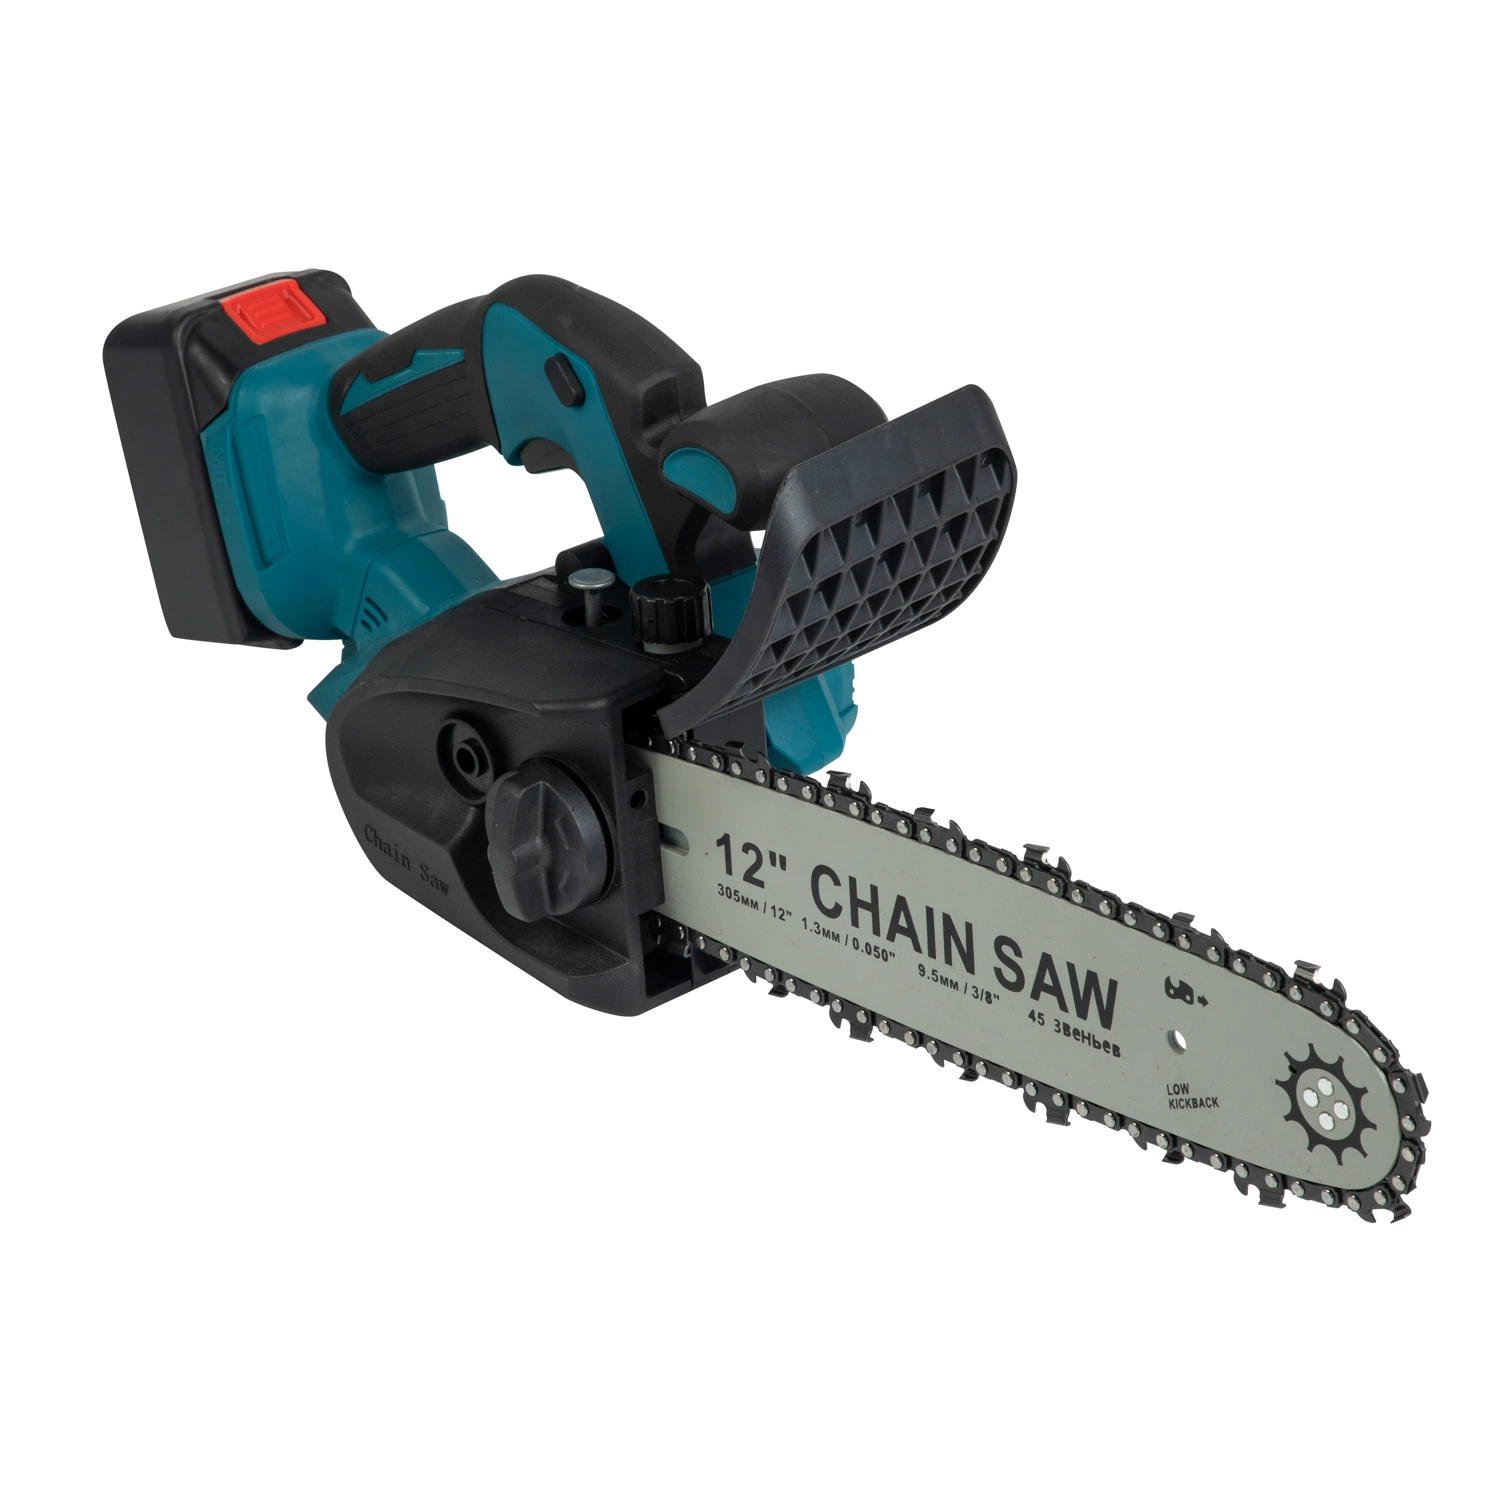 20V Battery Electric Chain Saw Woodworking Lithium Battery Chain Saw